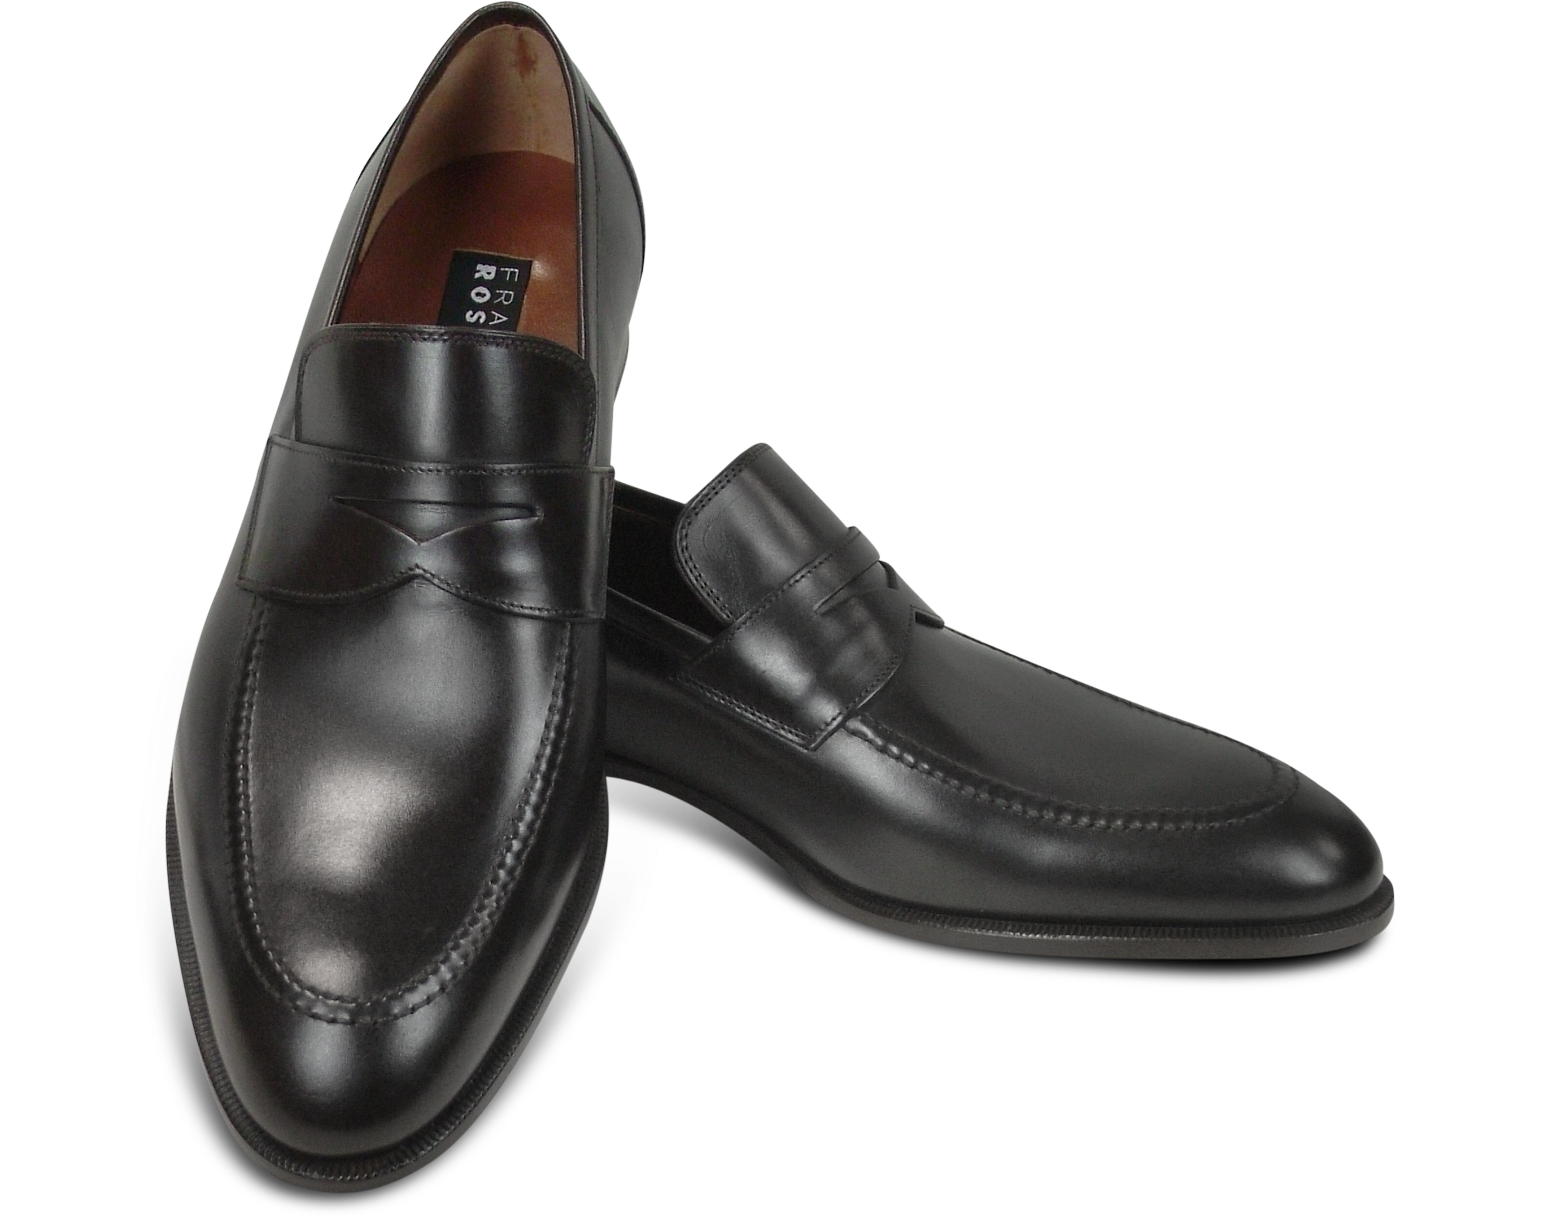 Fratelli Rossetti Black Calf Leather Penny Loafer Shoes 11 (12 US | 11 UK |  45 EU) at FORZIERI